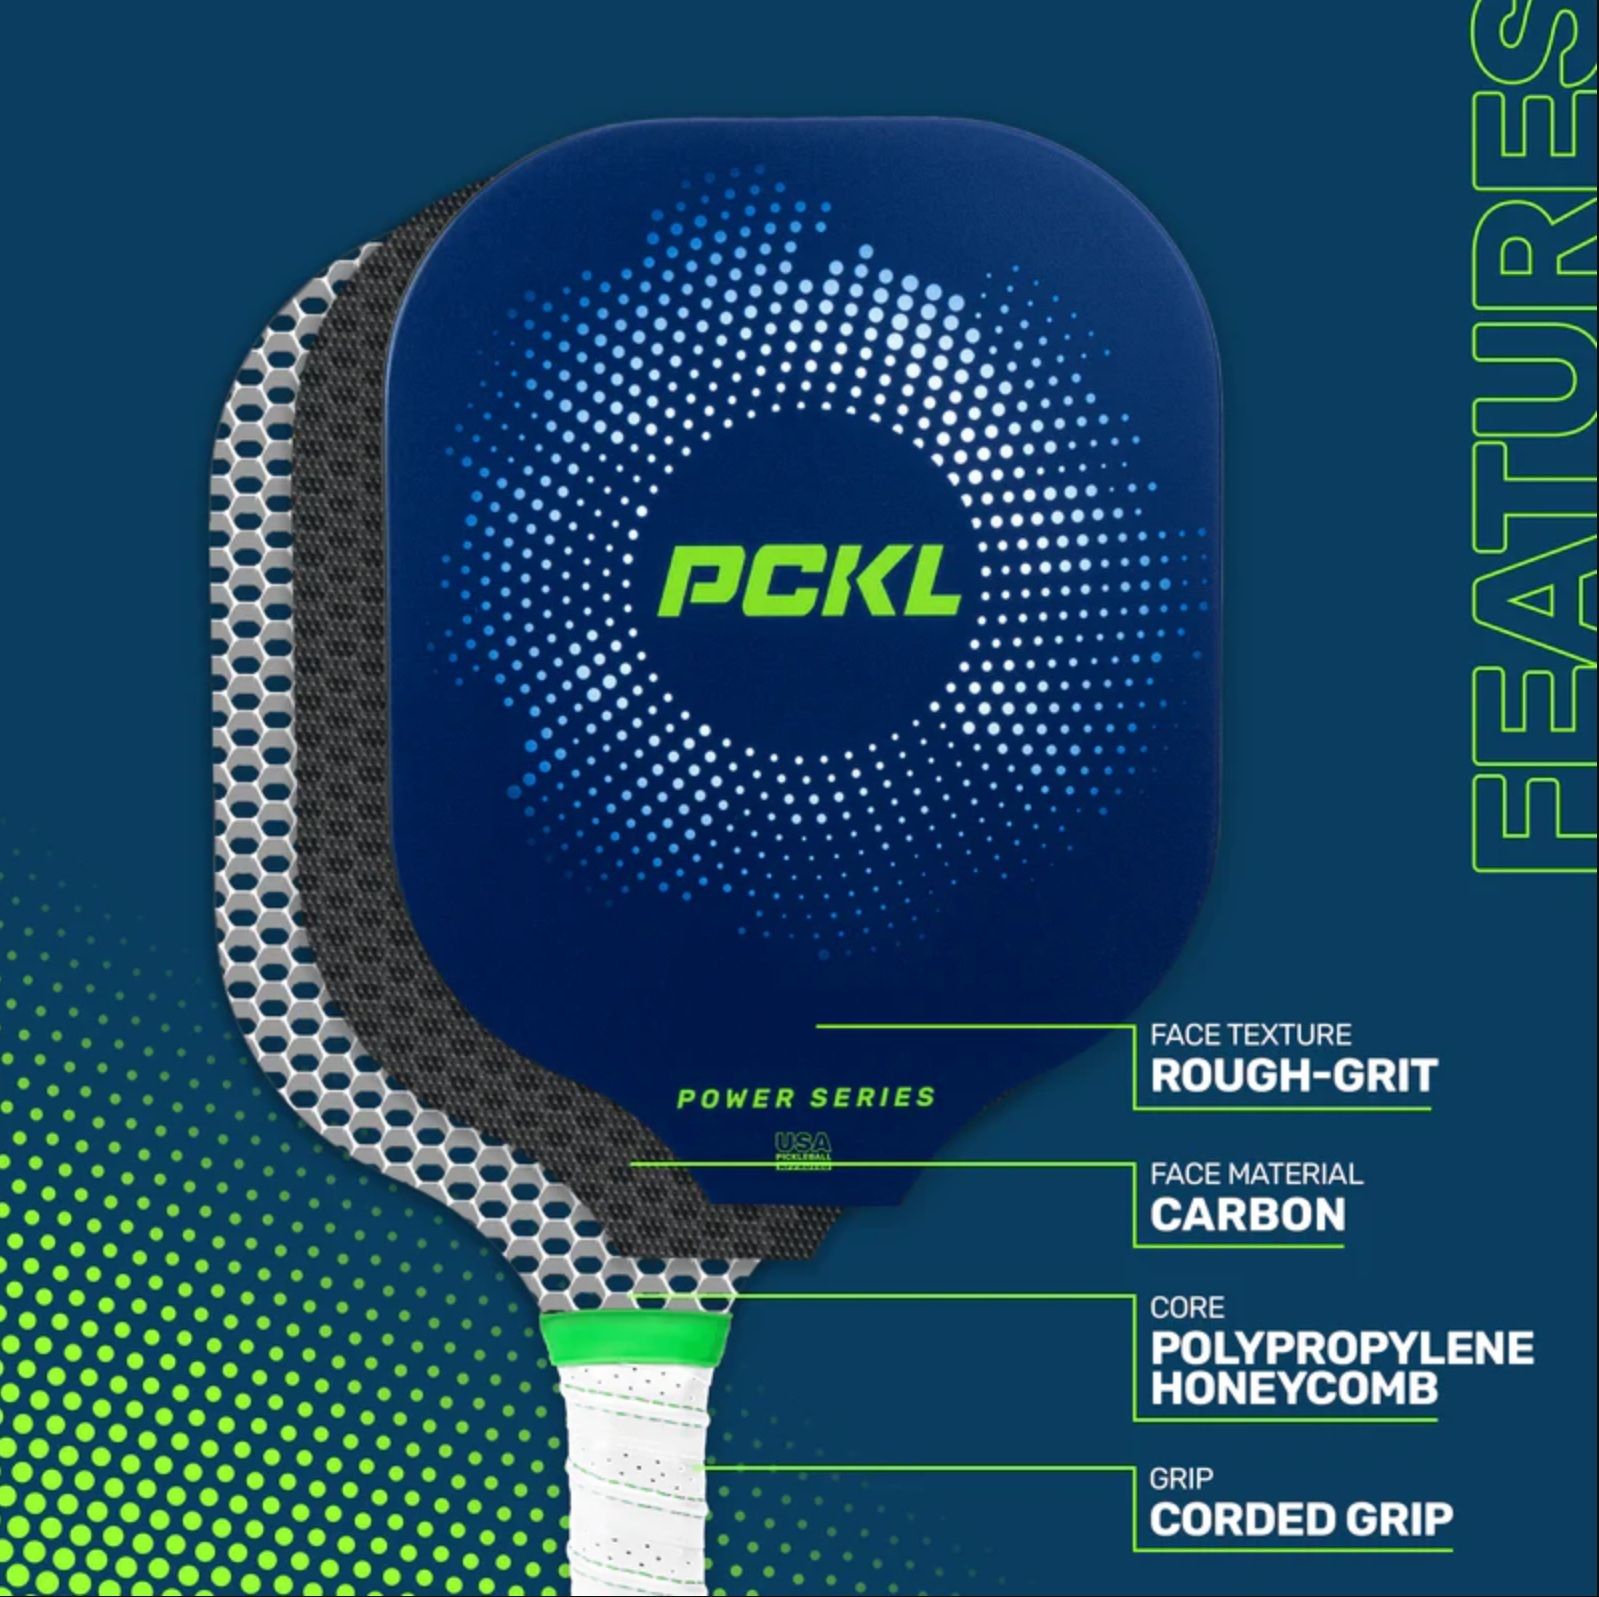 The PCKL Power Series paddle generates tons of spin